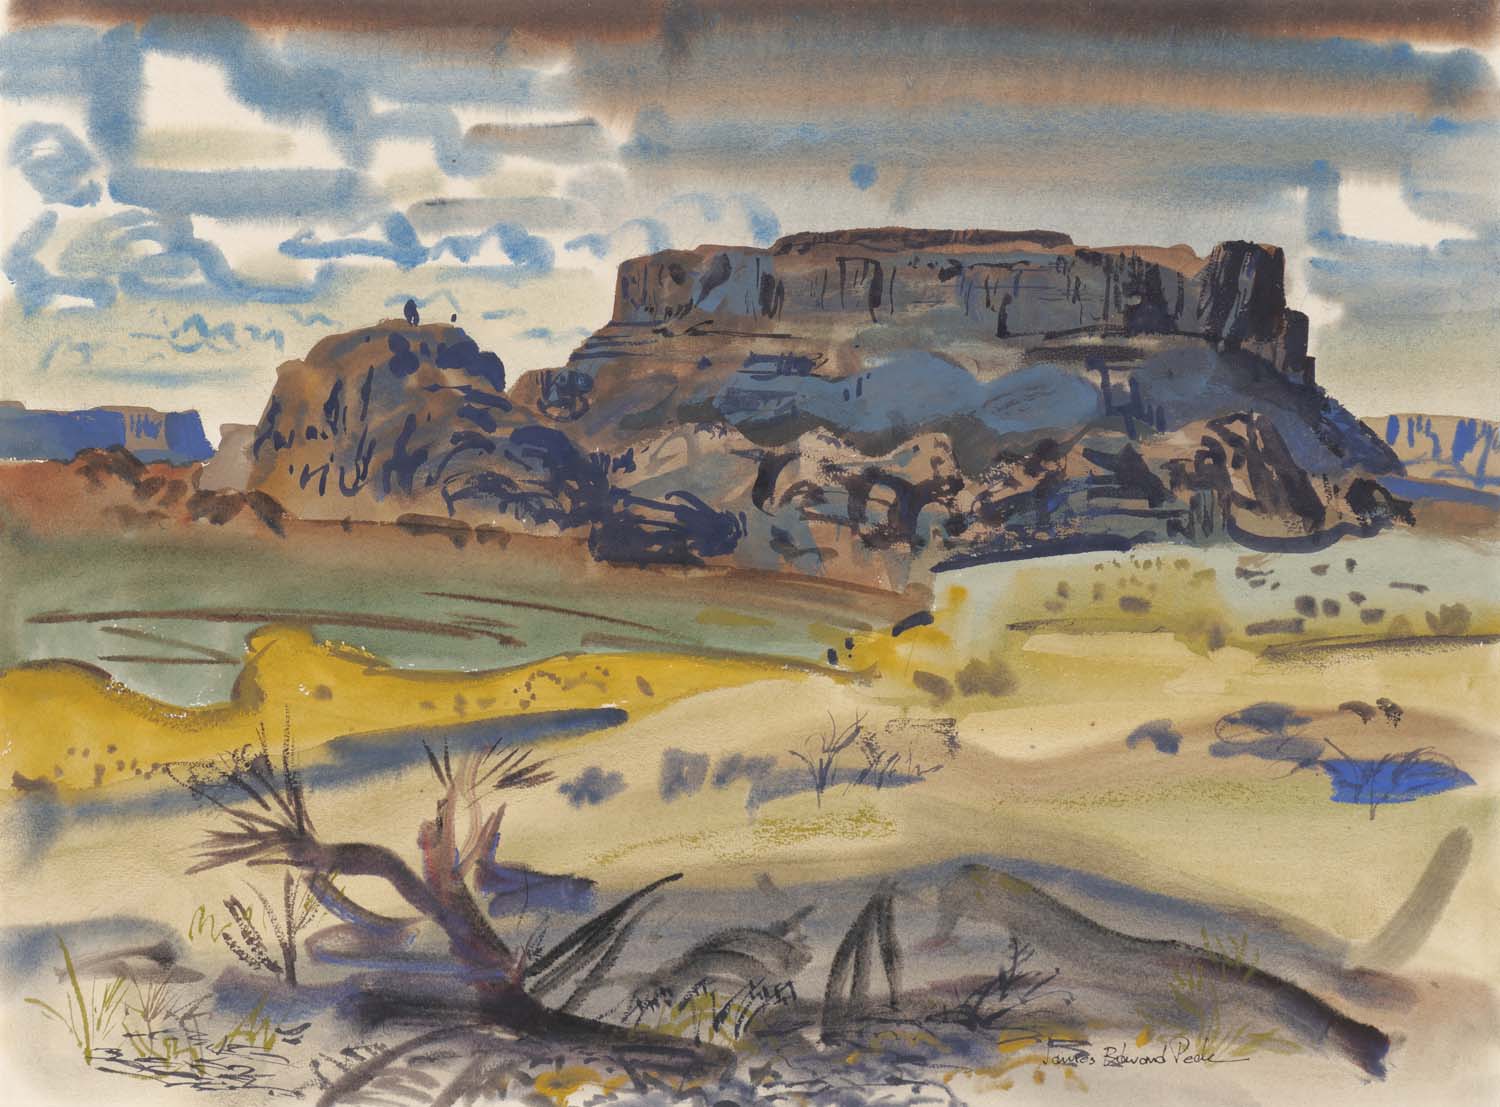 Watercolor painting of a landscape with a large rock formation, a gray sky, and scraggly vegetation in the foreground 